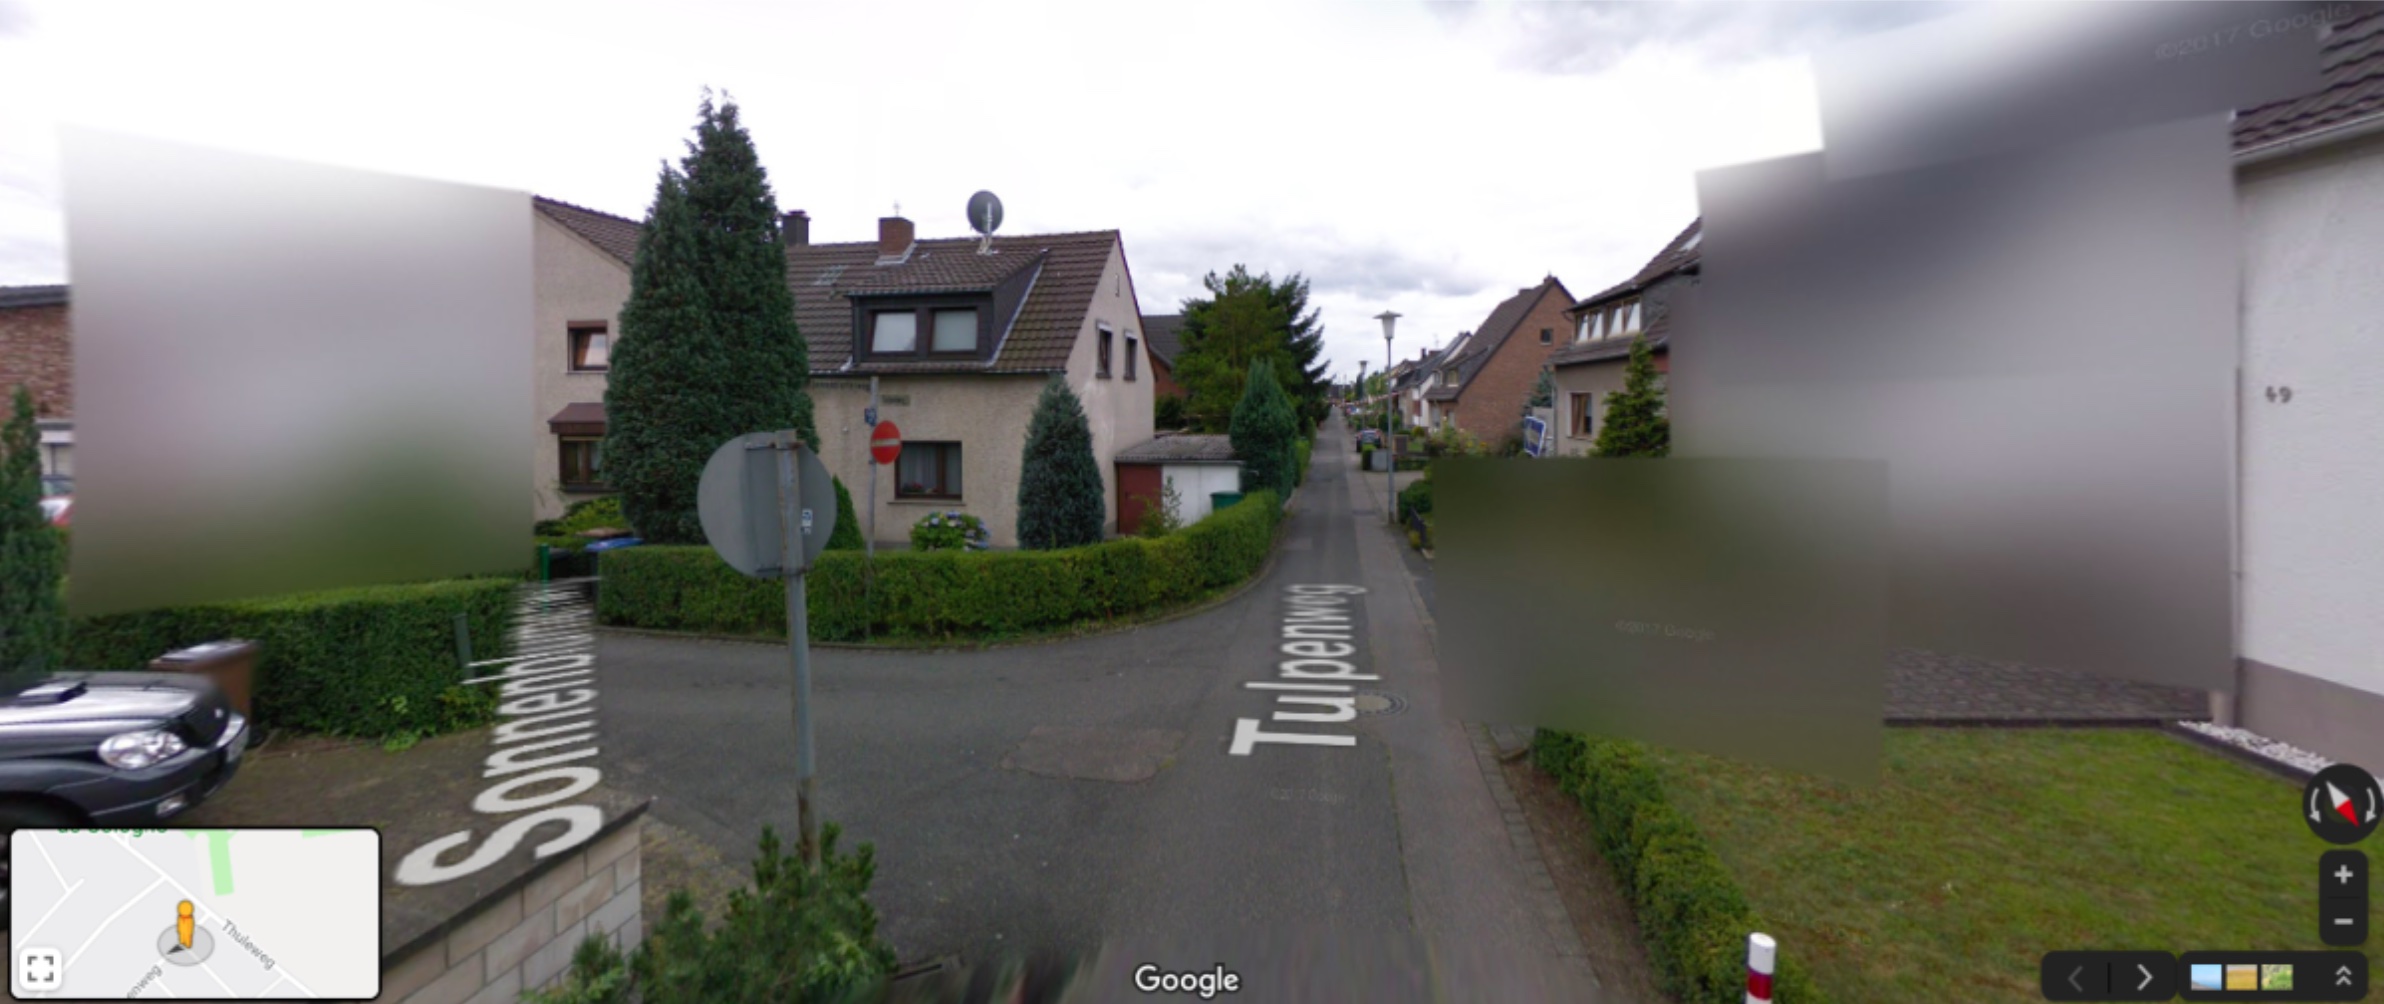 View picturesque streets in Germany through Google street view.